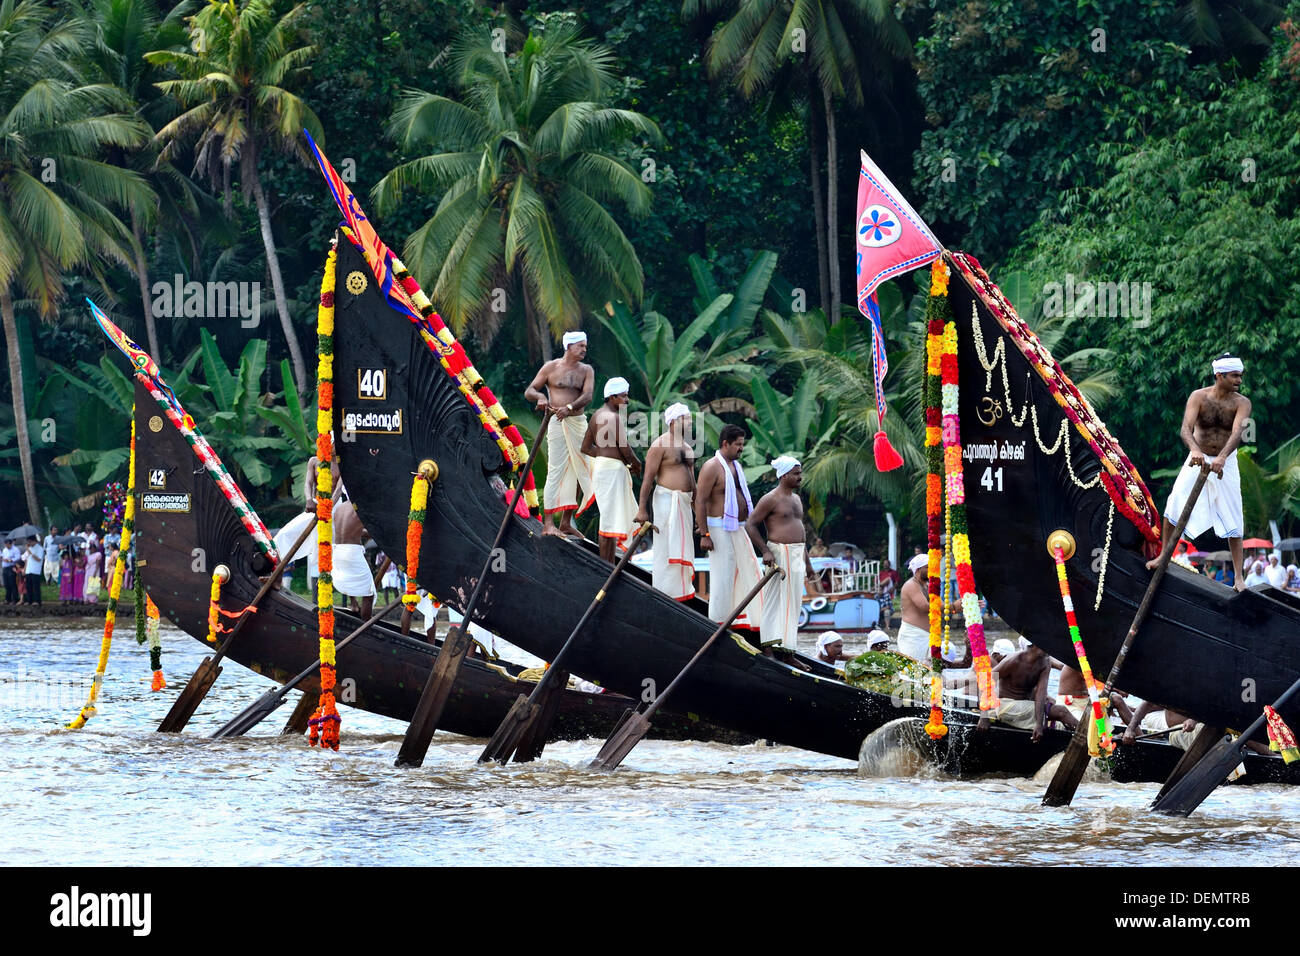 The Aranmula Boat Race the oldest river boat fiesta in Kerala, the south western State of India is held during Onam (August-September). It takes place at Aranmula, near a Hindu temple dedicated to Lord Krishna and Arjuna. The snake boats move in pairs to the rhythm of full-throated singing and shouting watched by an exciting crowd. Stock Photo